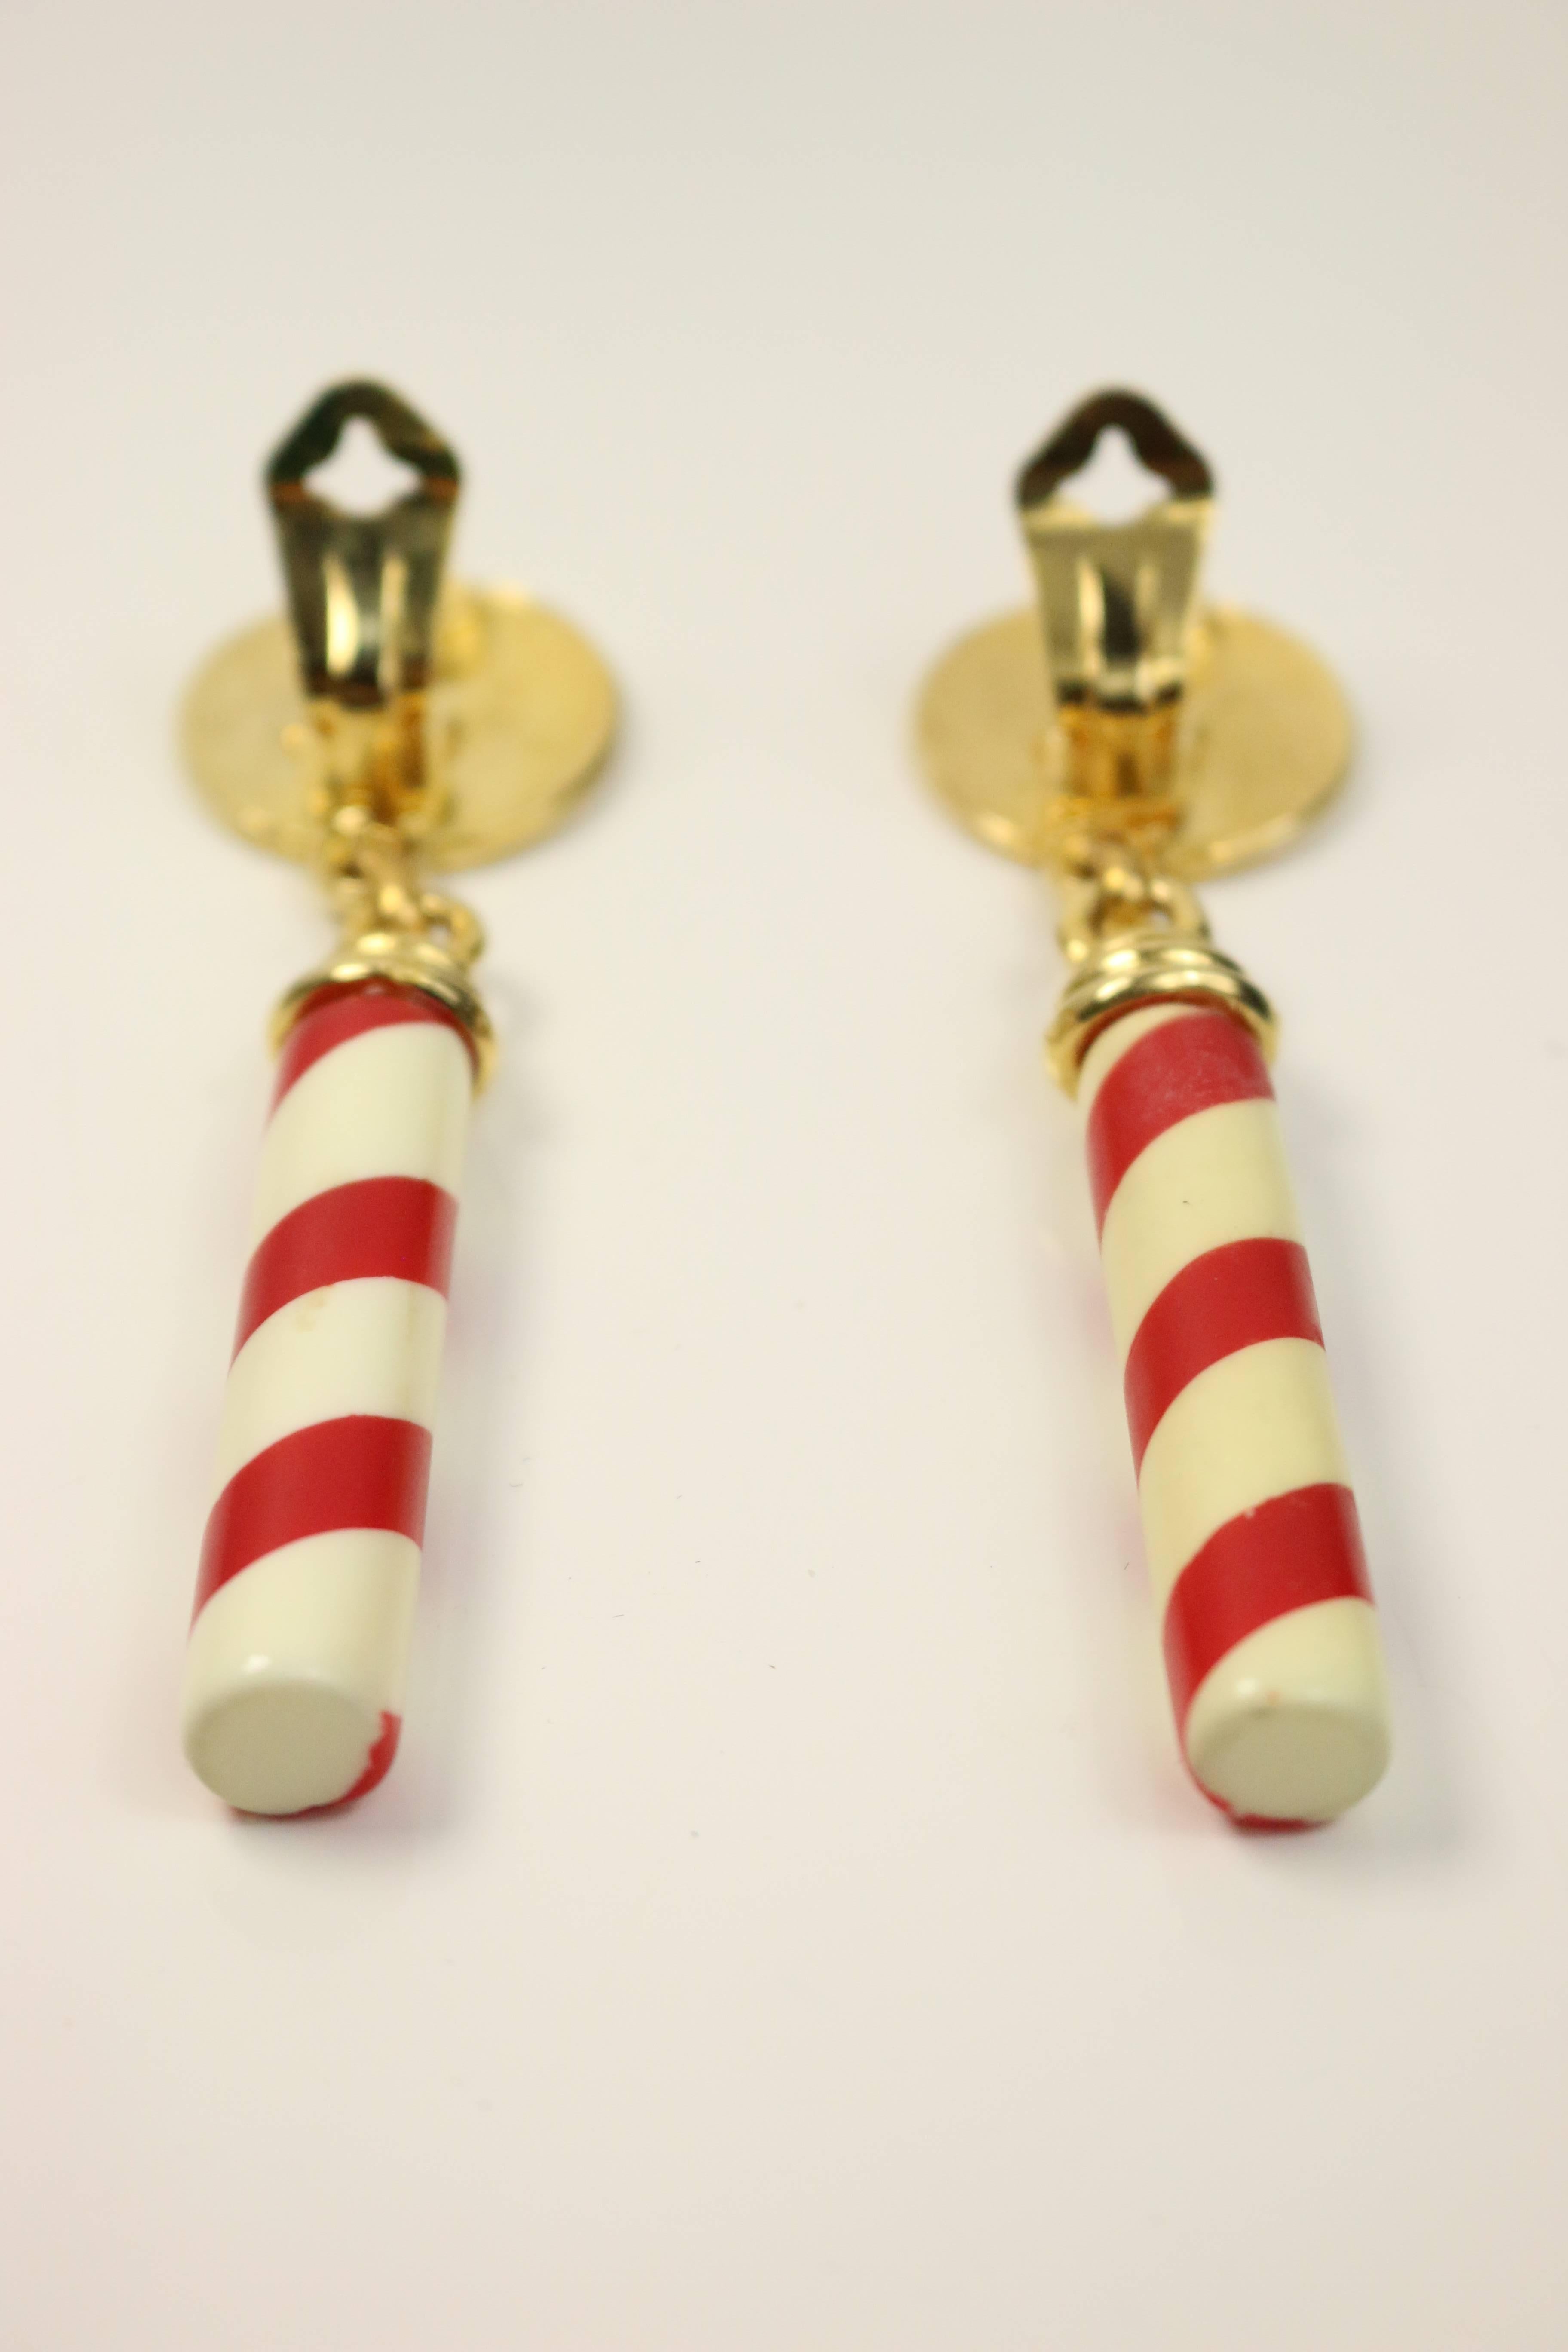 - Vintage 90s Moschino gold tone candy cane drop clip-on earrings with "Moschino Milano" written on it.  Very pop art with fun and funky Moschino style. Great for summer! 

- Height: 3.25in. 

-  Made in Italy. 